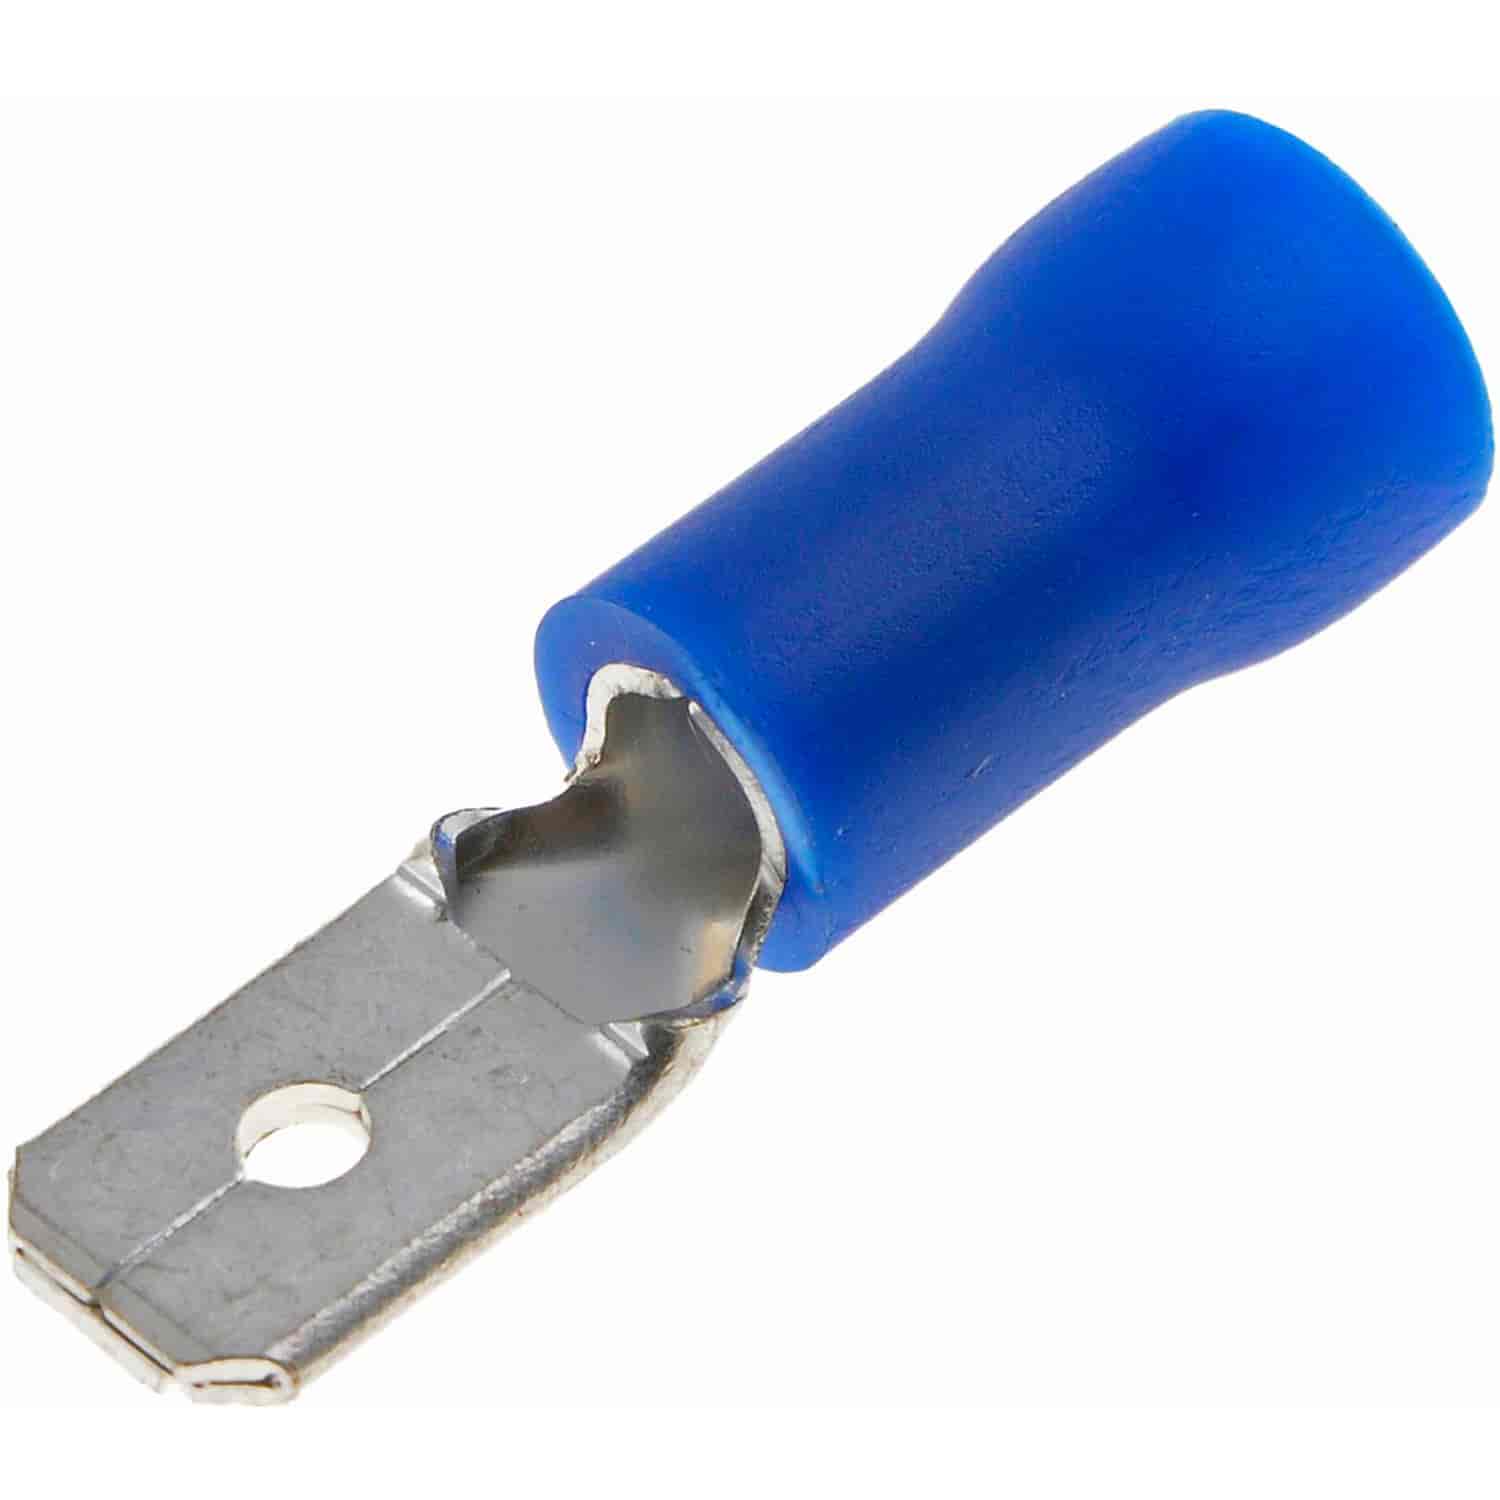 16-14 Gauge Male Disconnect .187 In. Blue